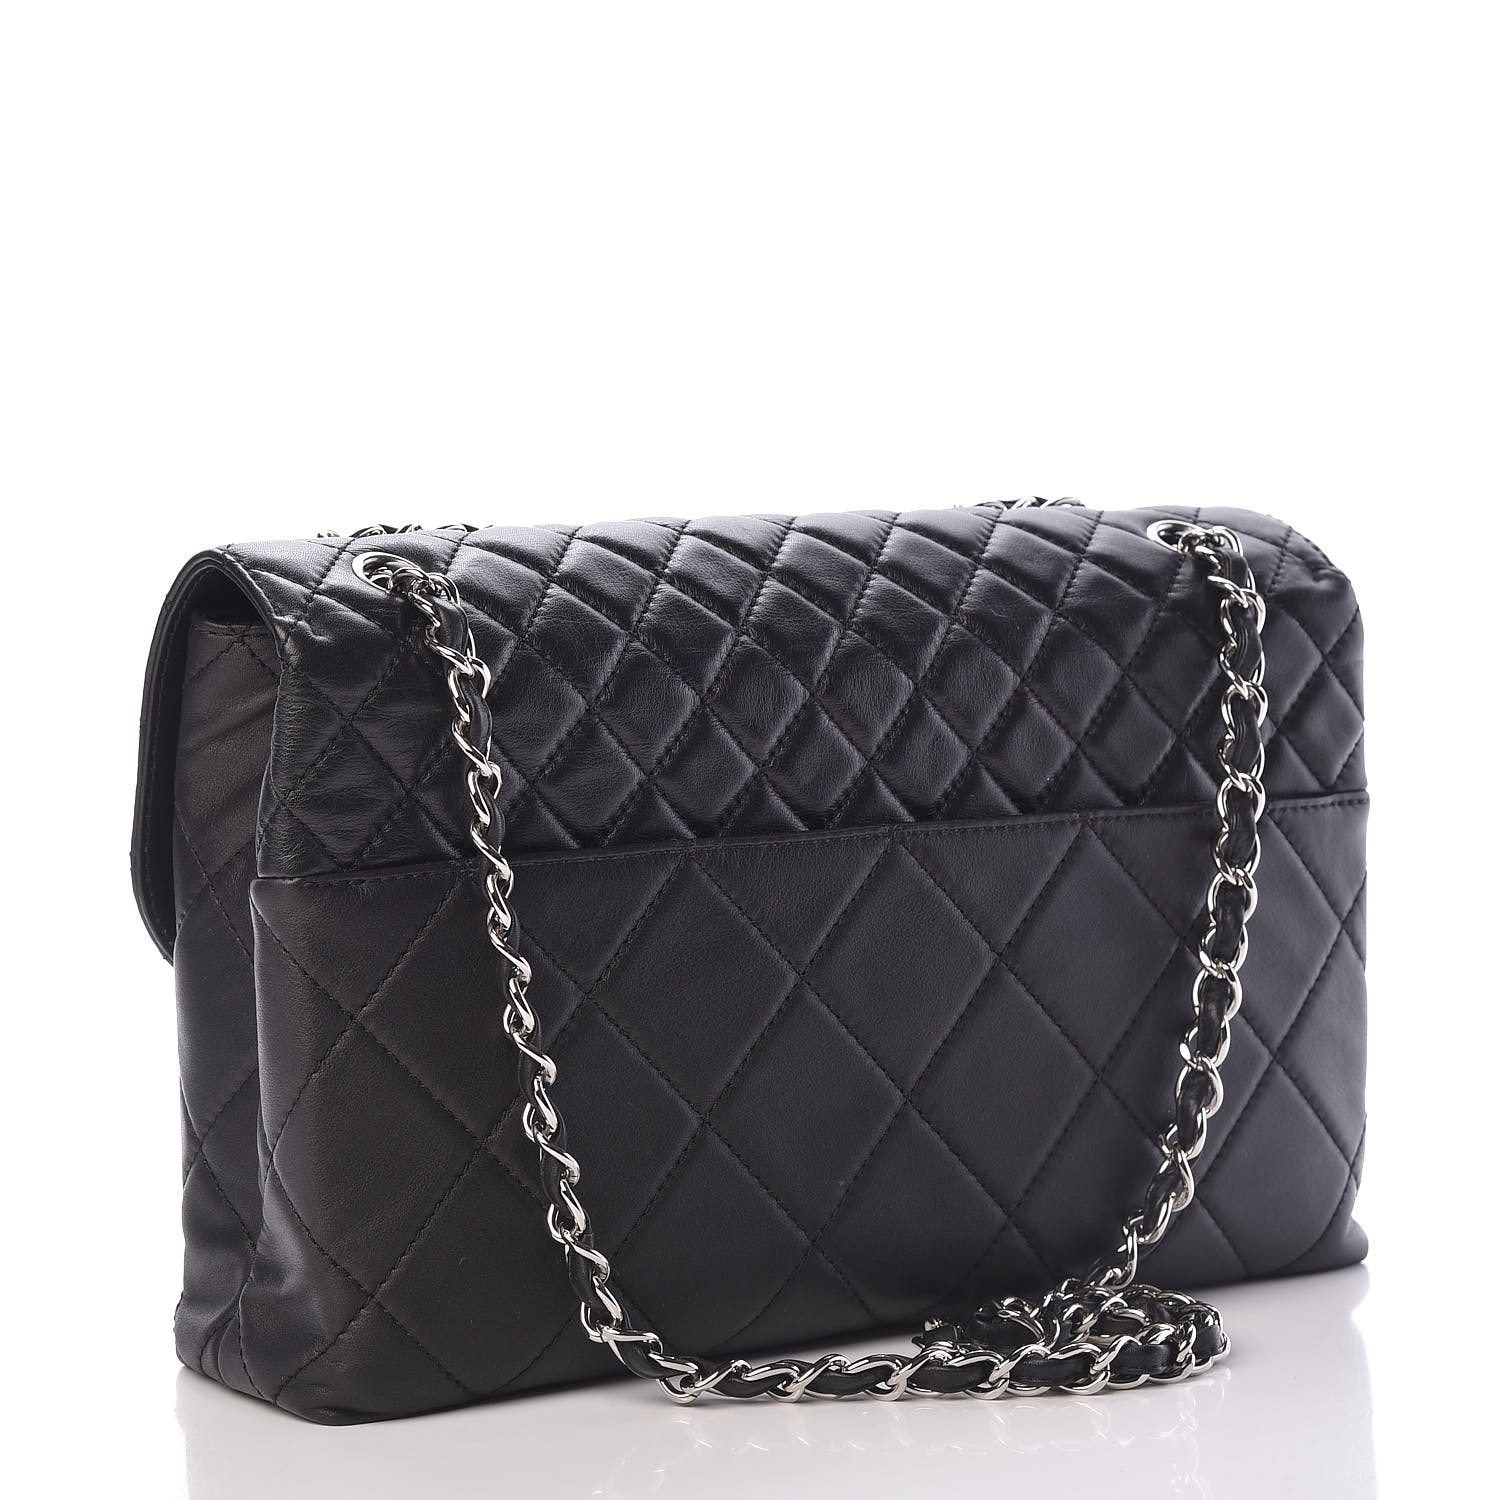 CHANEL Calfskin Quilted In The Business Flap Bag Black 641128